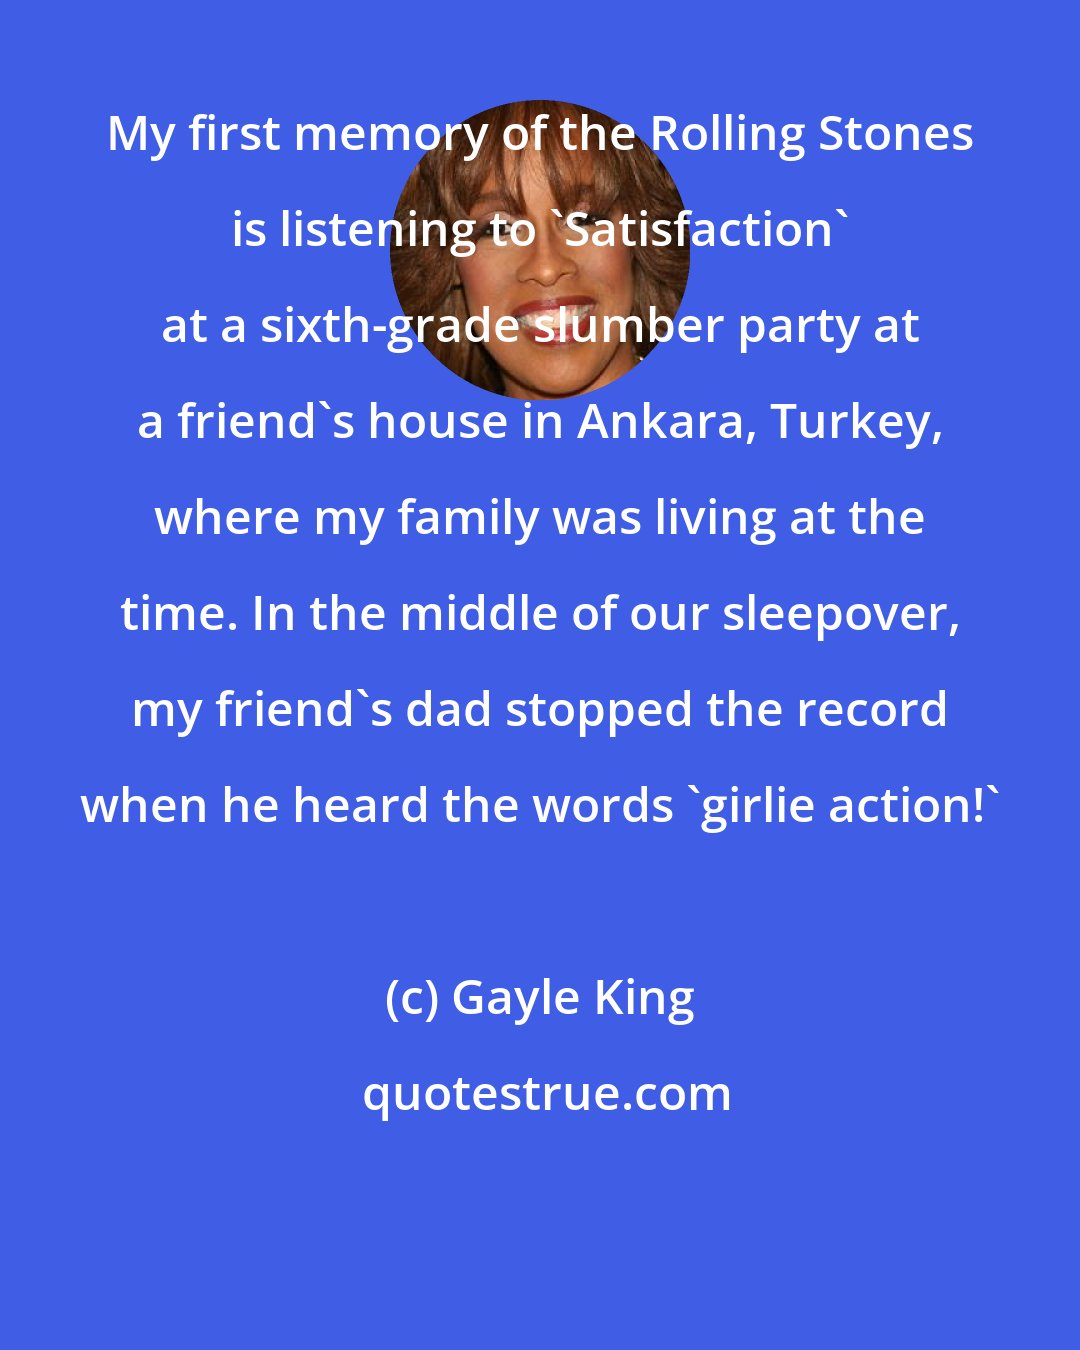 Gayle King: My first memory of the Rolling Stones is listening to 'Satisfaction' at a sixth-grade slumber party at a friend's house in Ankara, Turkey, where my family was living at the time. In the middle of our sleepover, my friend's dad stopped the record when he heard the words 'girlie action!'